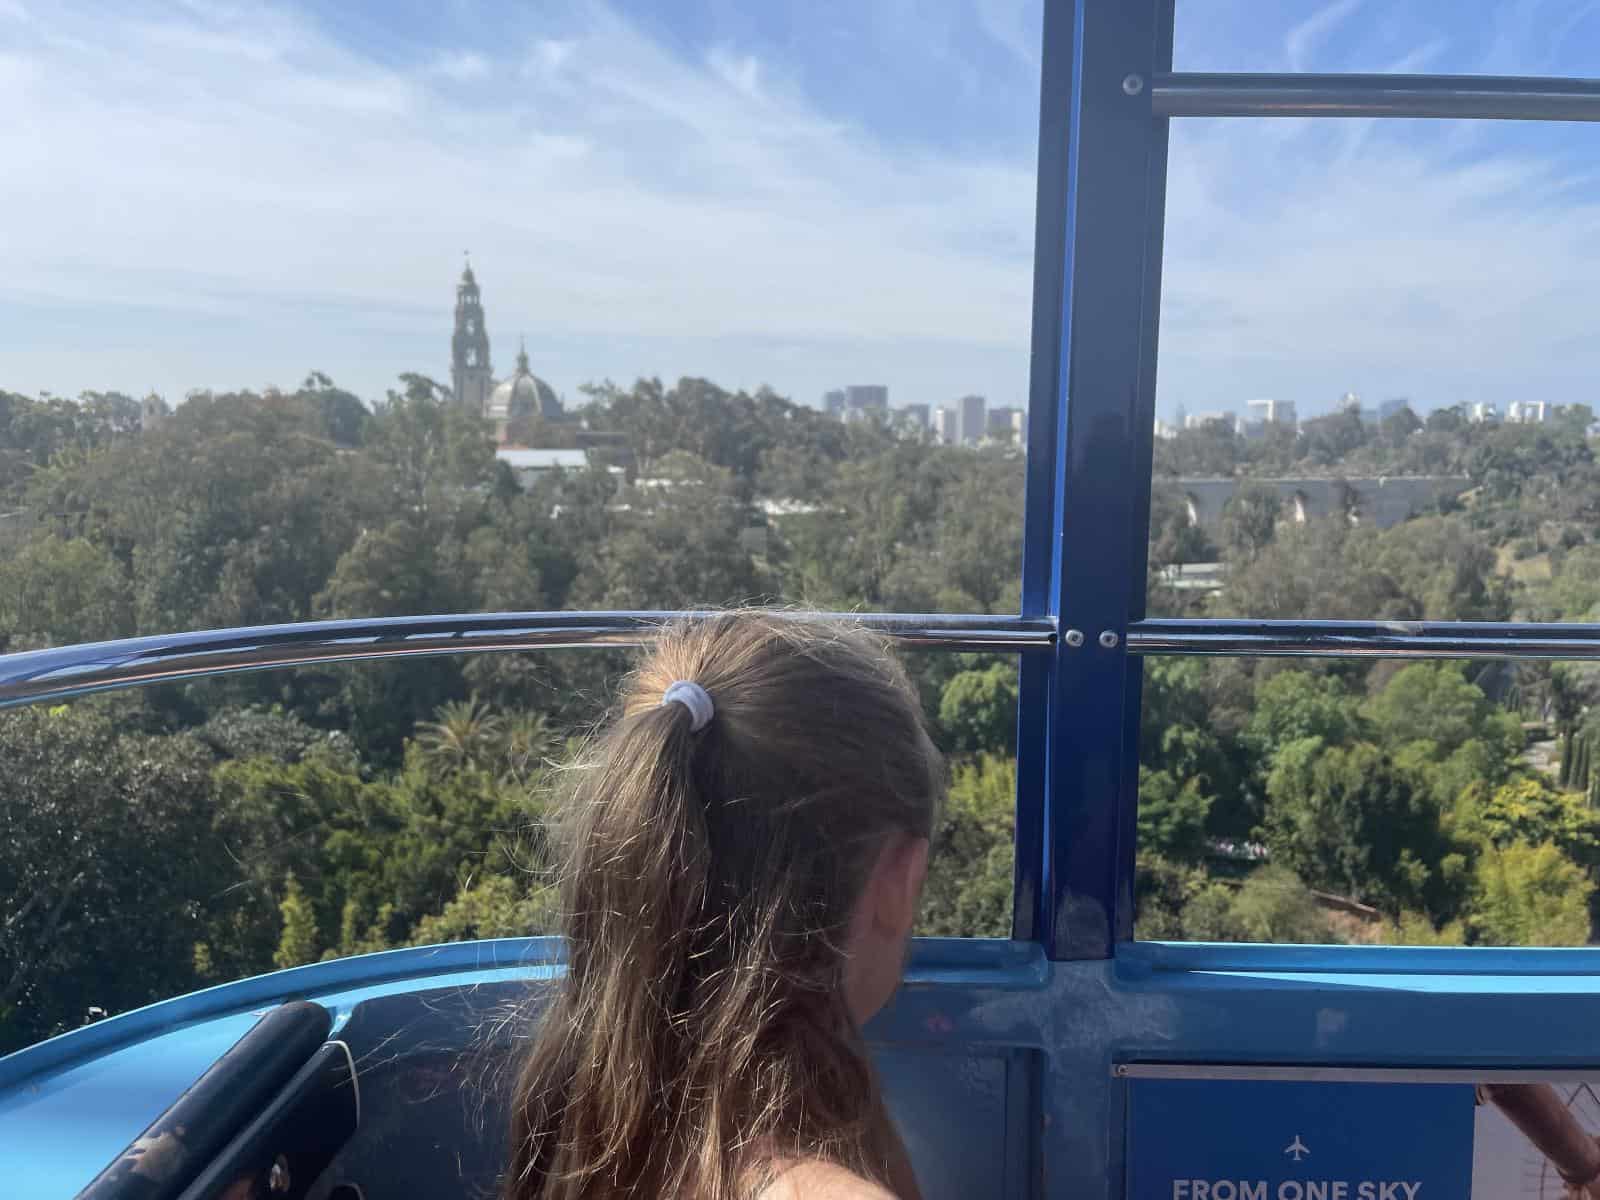 Visiting San Diego zoo with toddlers and baby - Skyfari